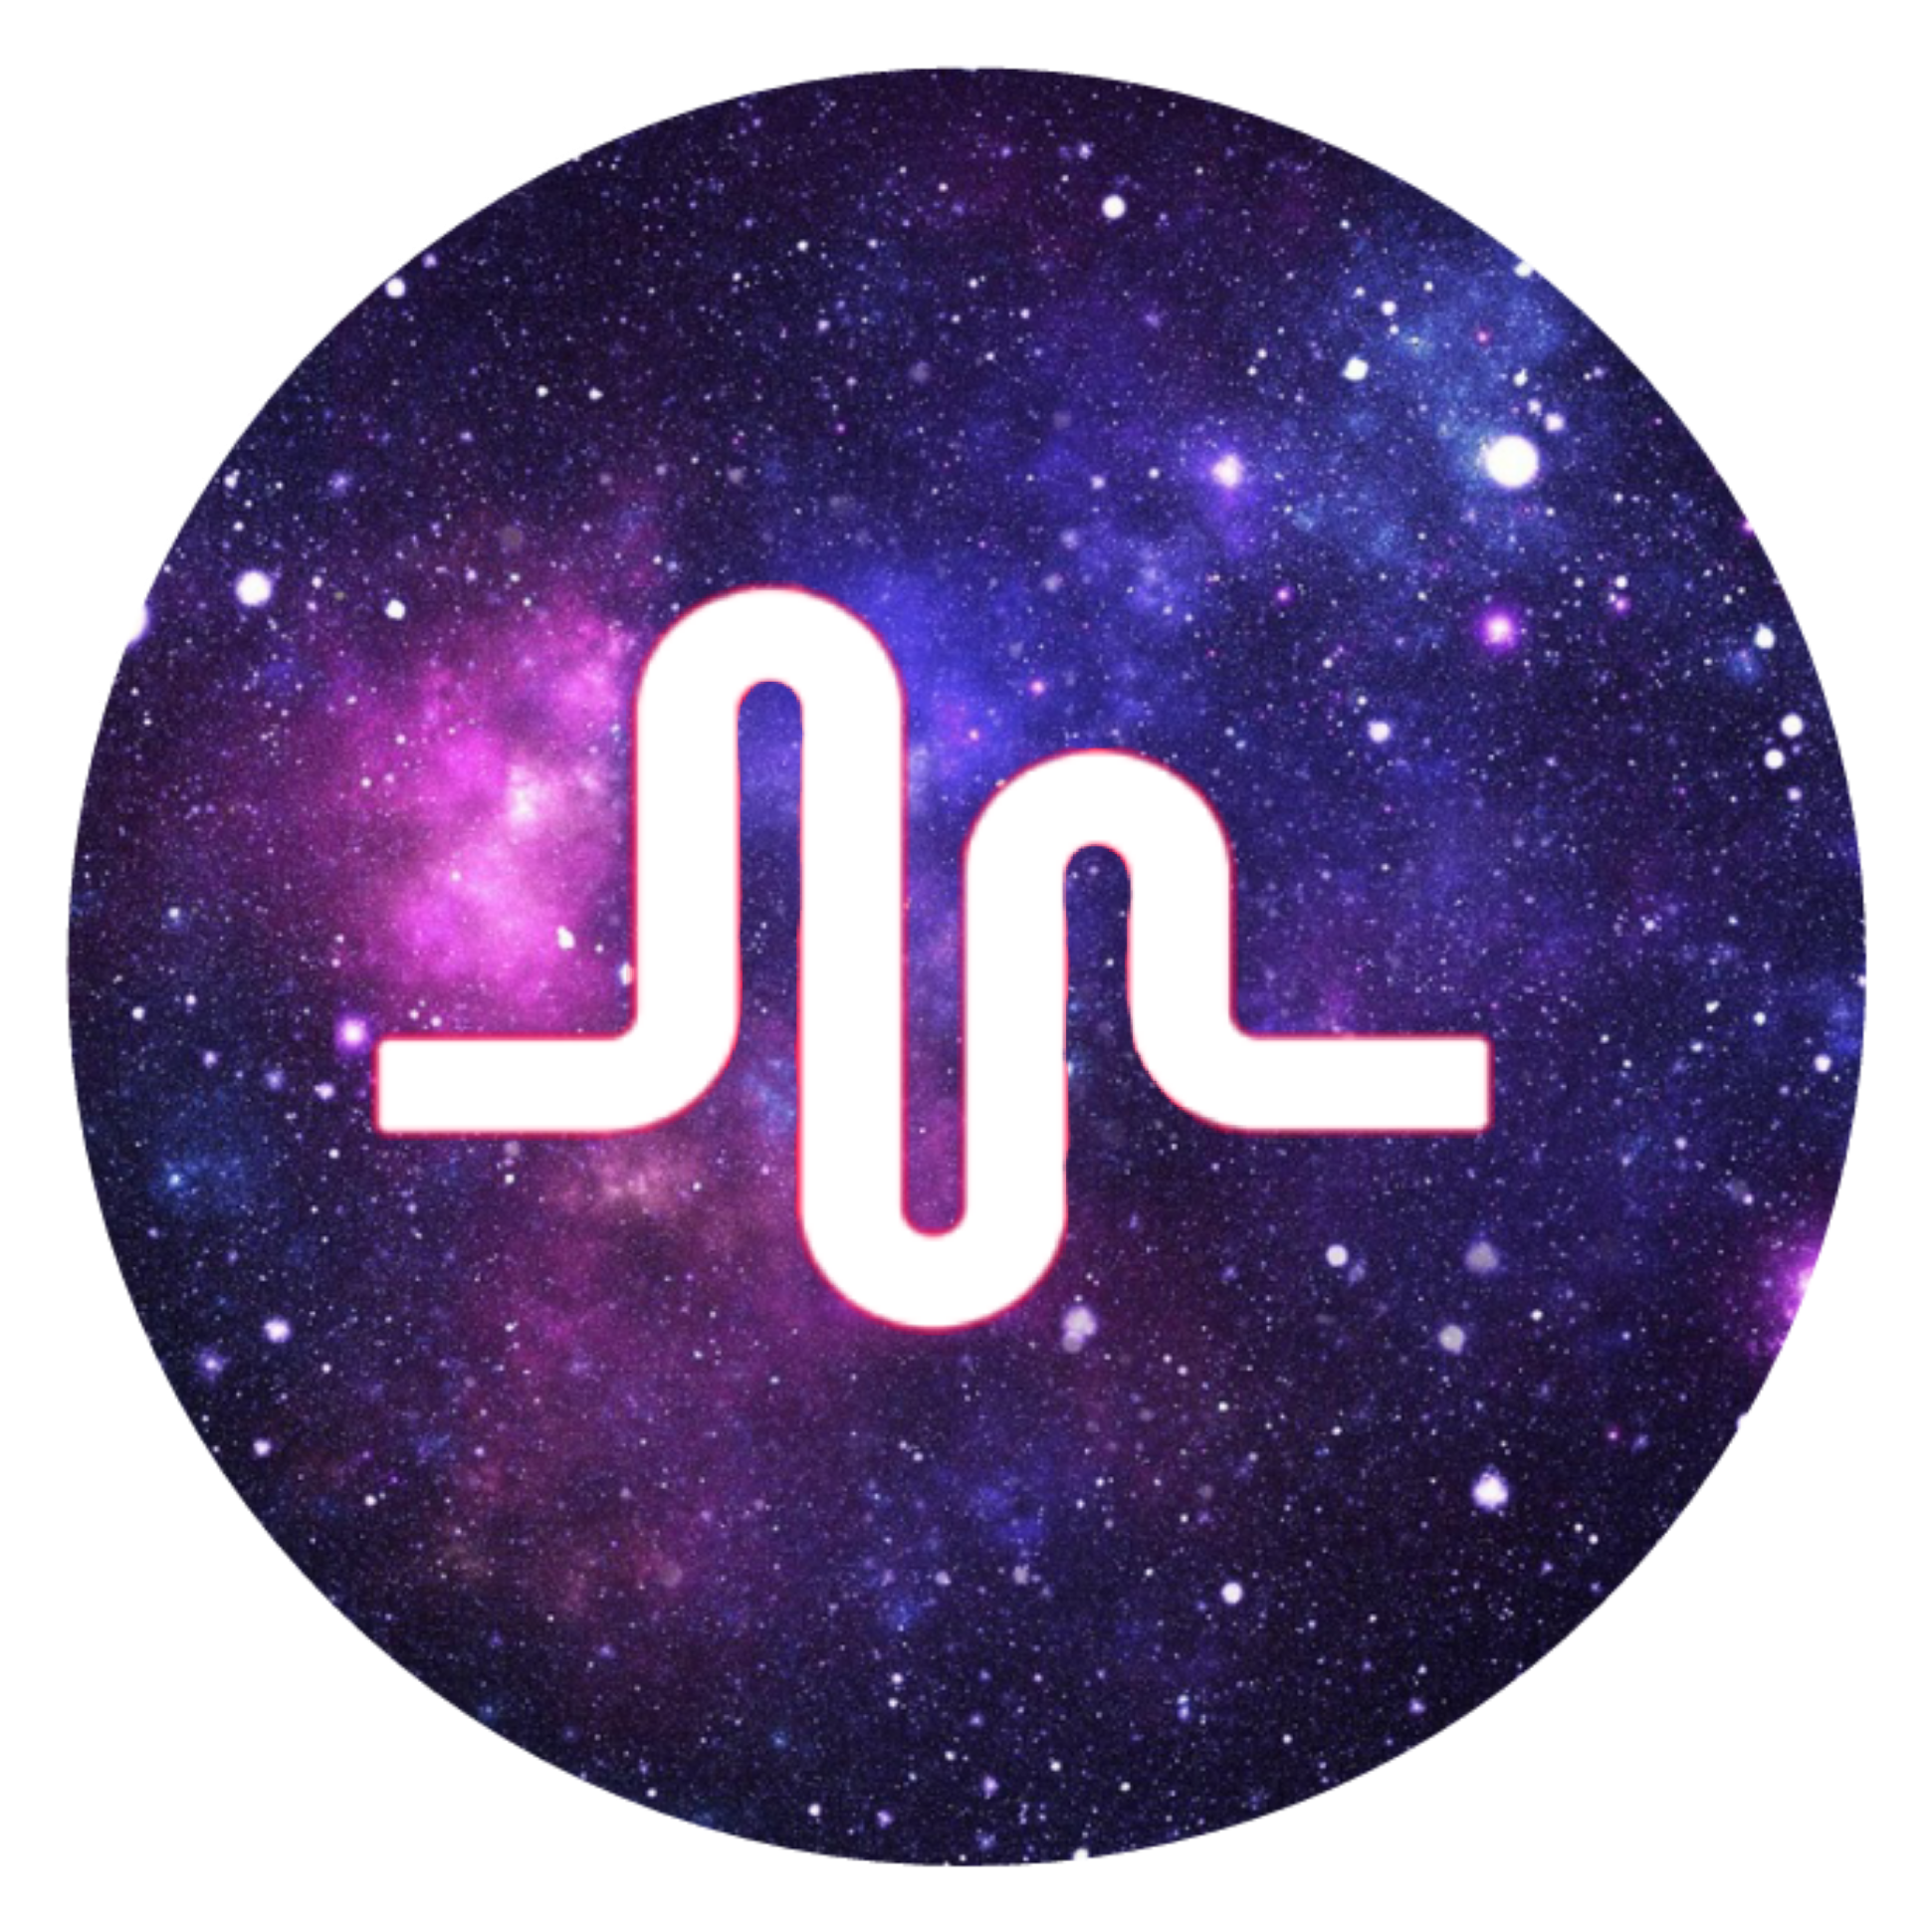 musical.ly galaxy musically music space... - 1941 x 1941 png 3198kB